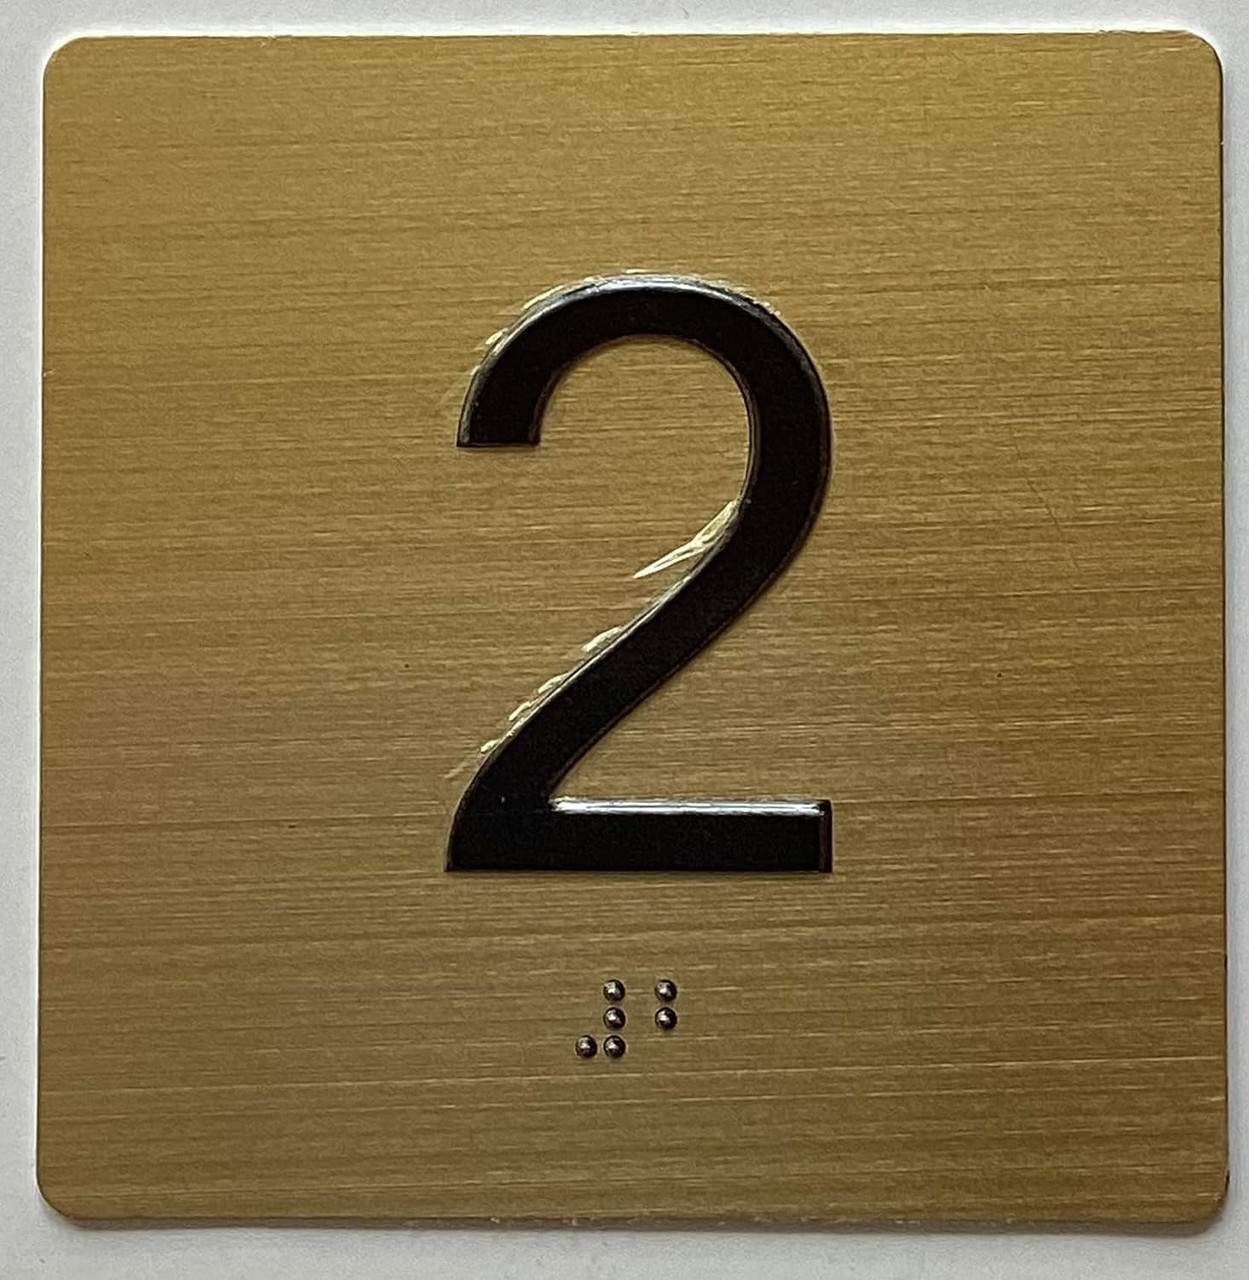 Star 1 (Star 1st) Elevator Jamb Plate Sign with Braille and Raised Number-Elevator Floor Number Sign(Silver)